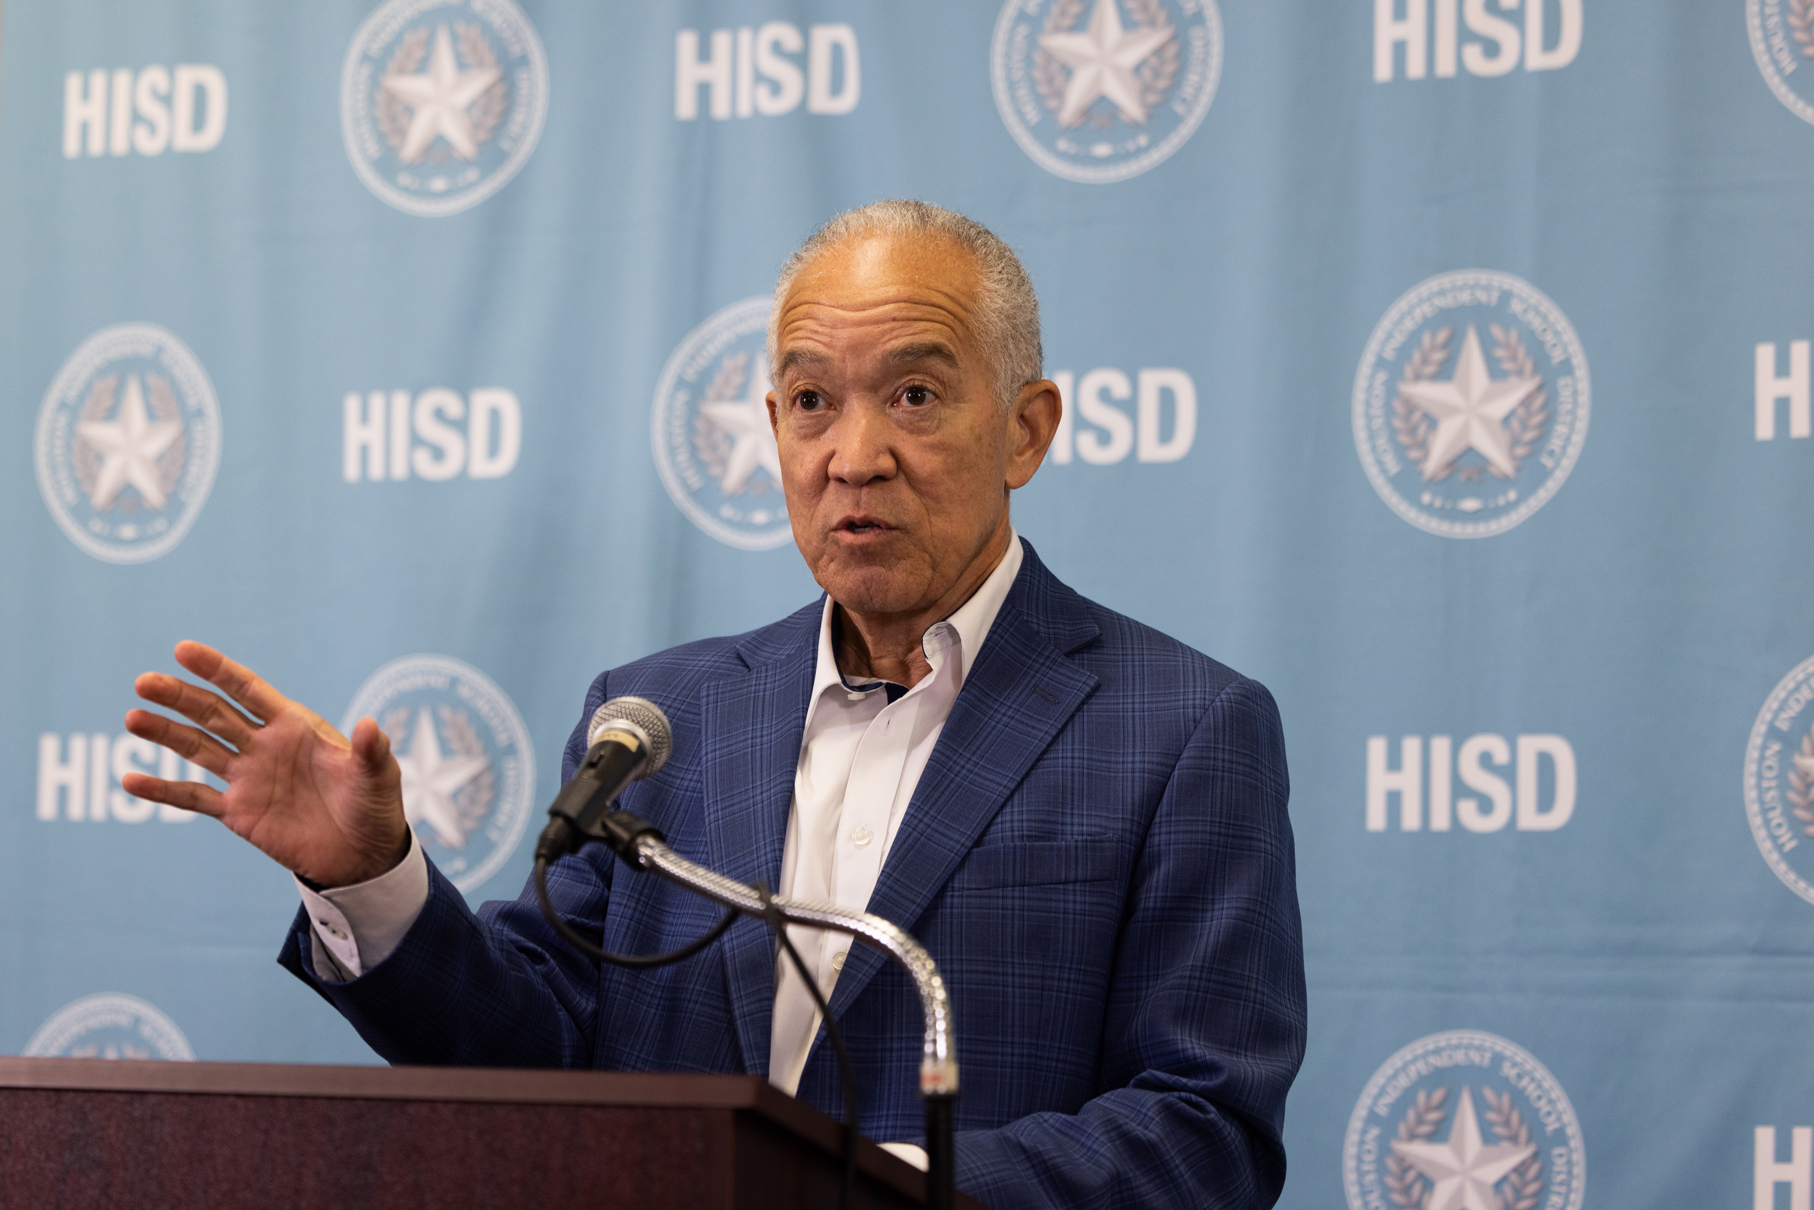 HISD’s new superintendent Mike Miles answers questions